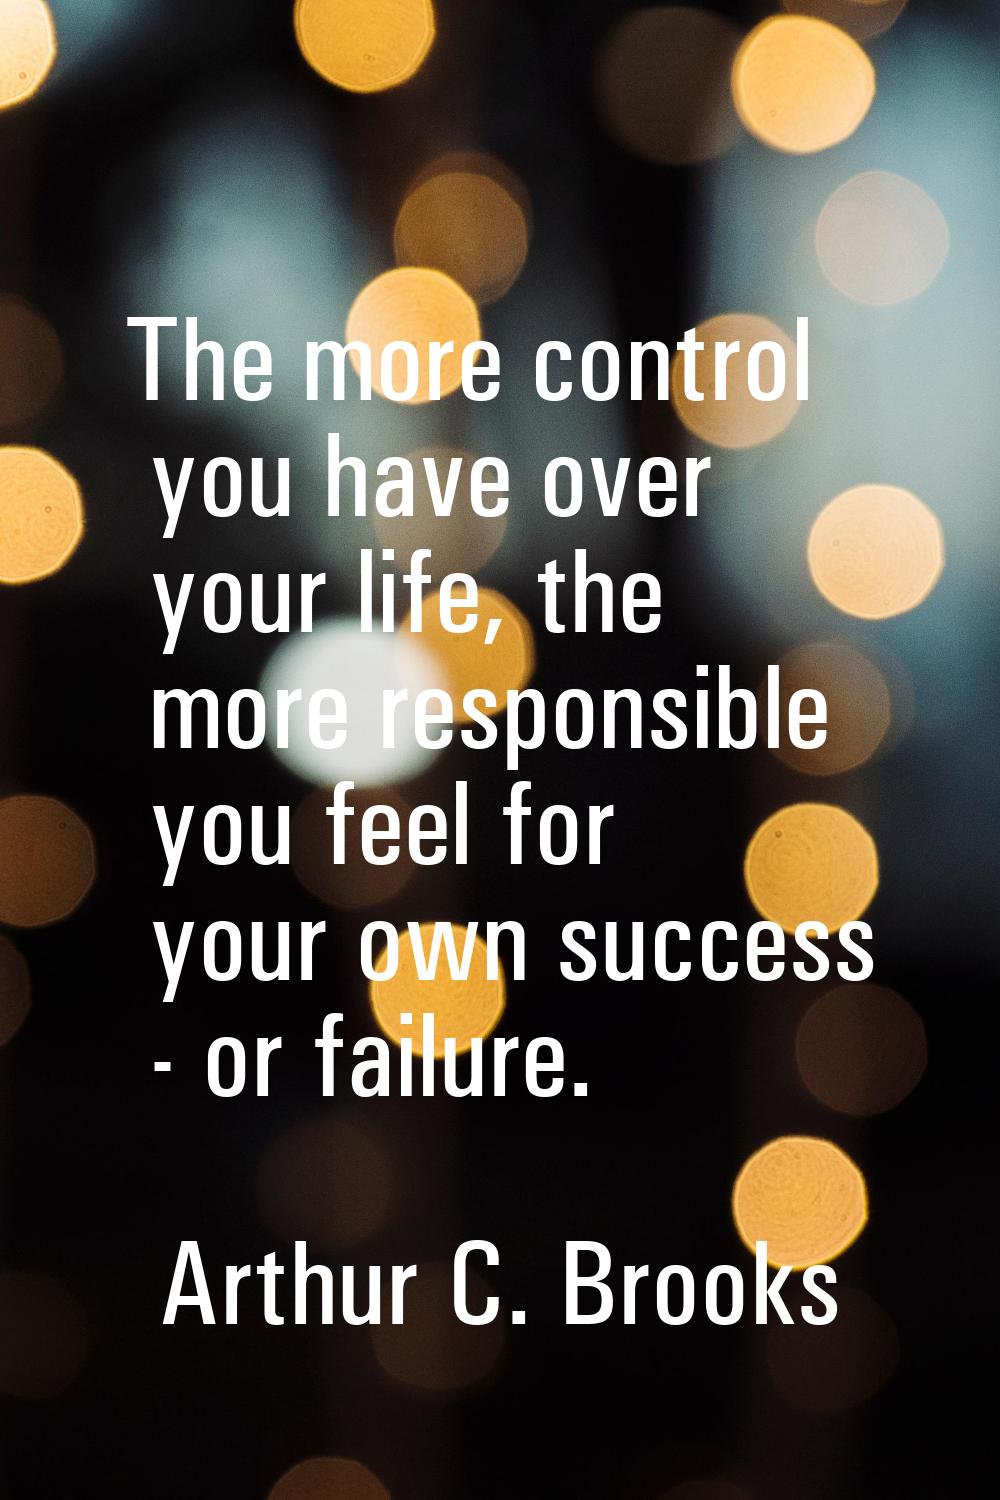 The more control you have over your life, the more responsible you feel for your own success - or f